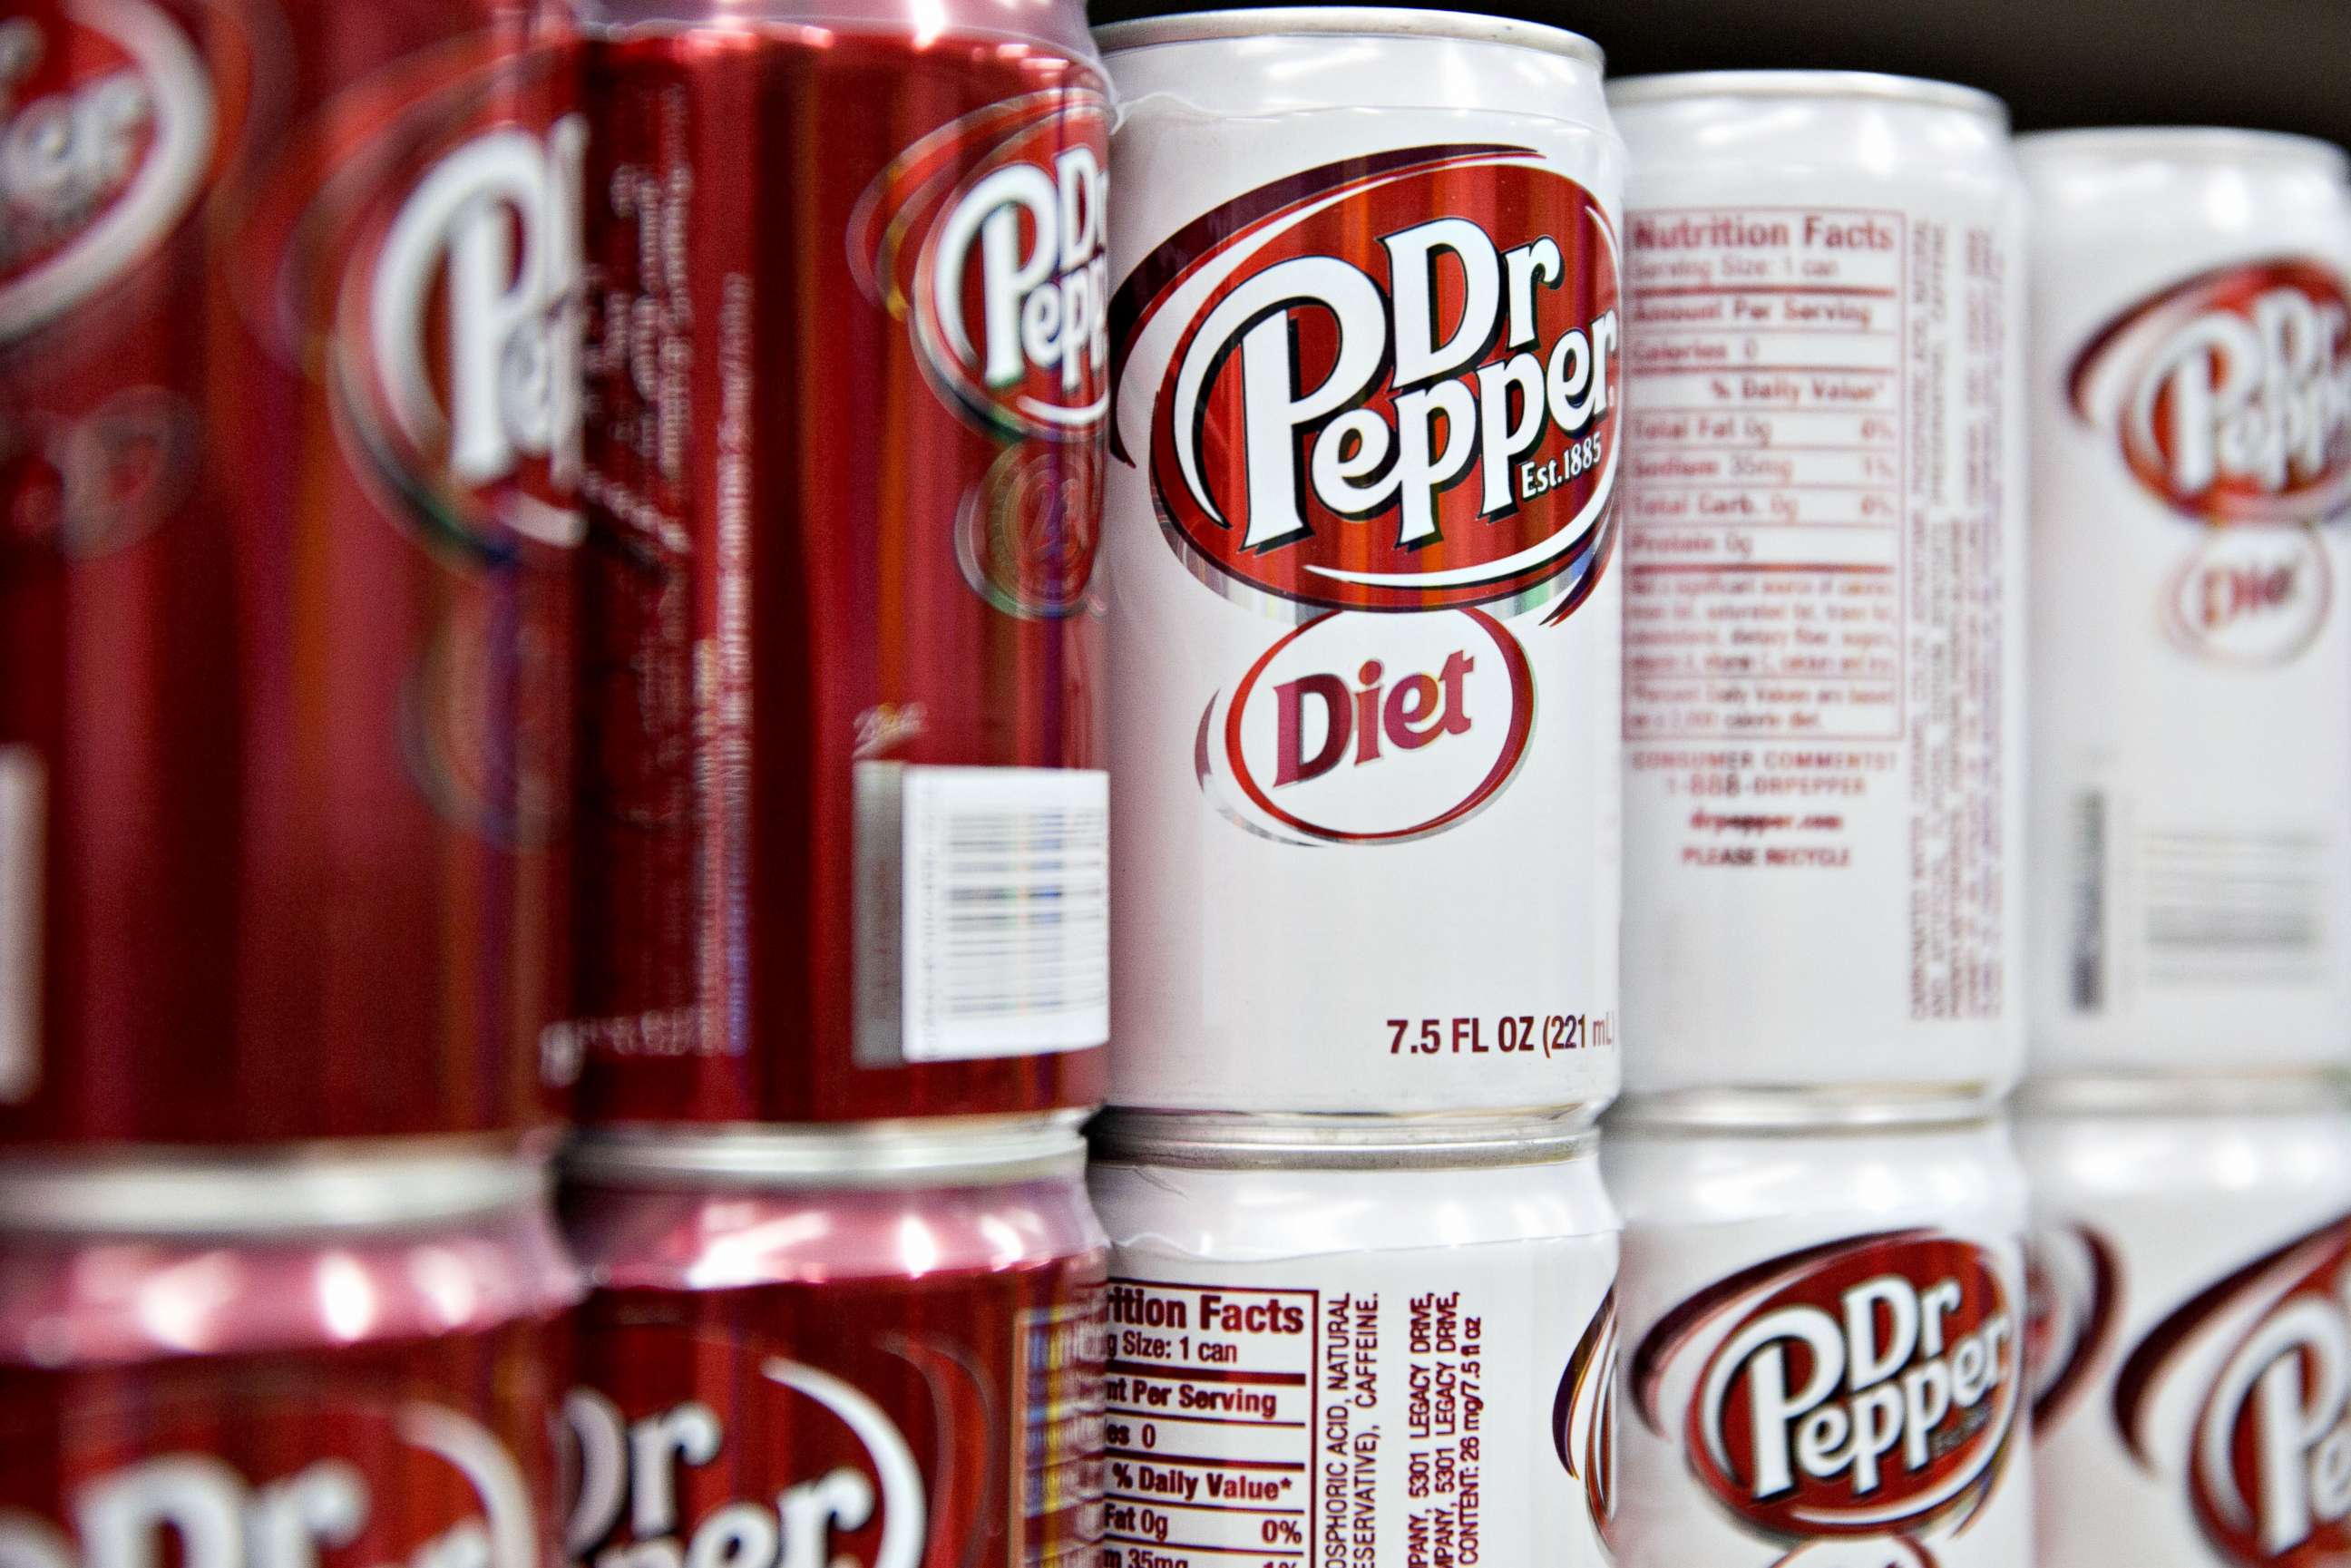 PHOTO: Cans of Dr Pepper Snapple Group Inc. Diet Dr Pepper brand soda are displayed for sale at a supermarket in Princeton, Illinois, Jan. 29, 2018.